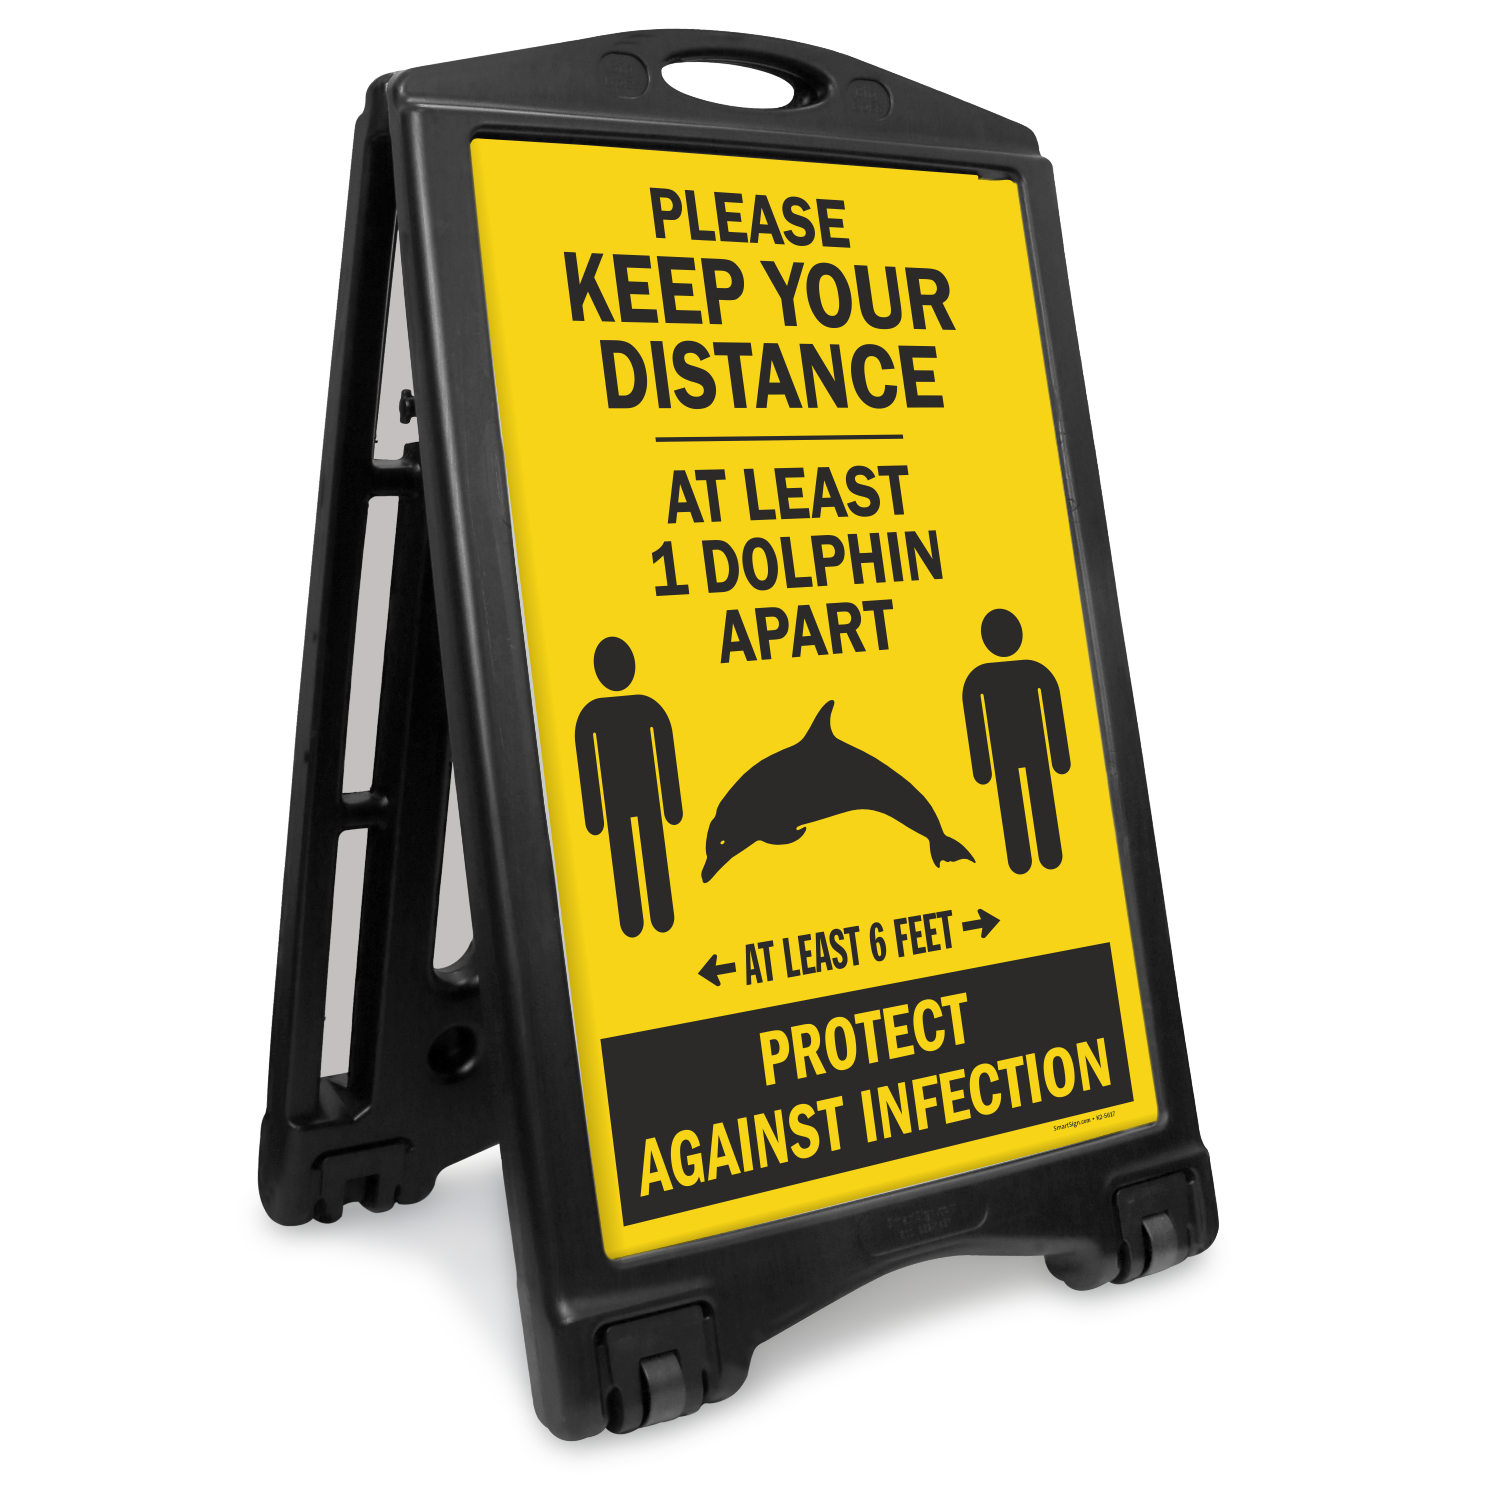 https://www.mysafetysign.com/img/lg/K/keep-your-distance-at-least-one-dolphin-apart-sidewalk-sign-k-roll-1311.png